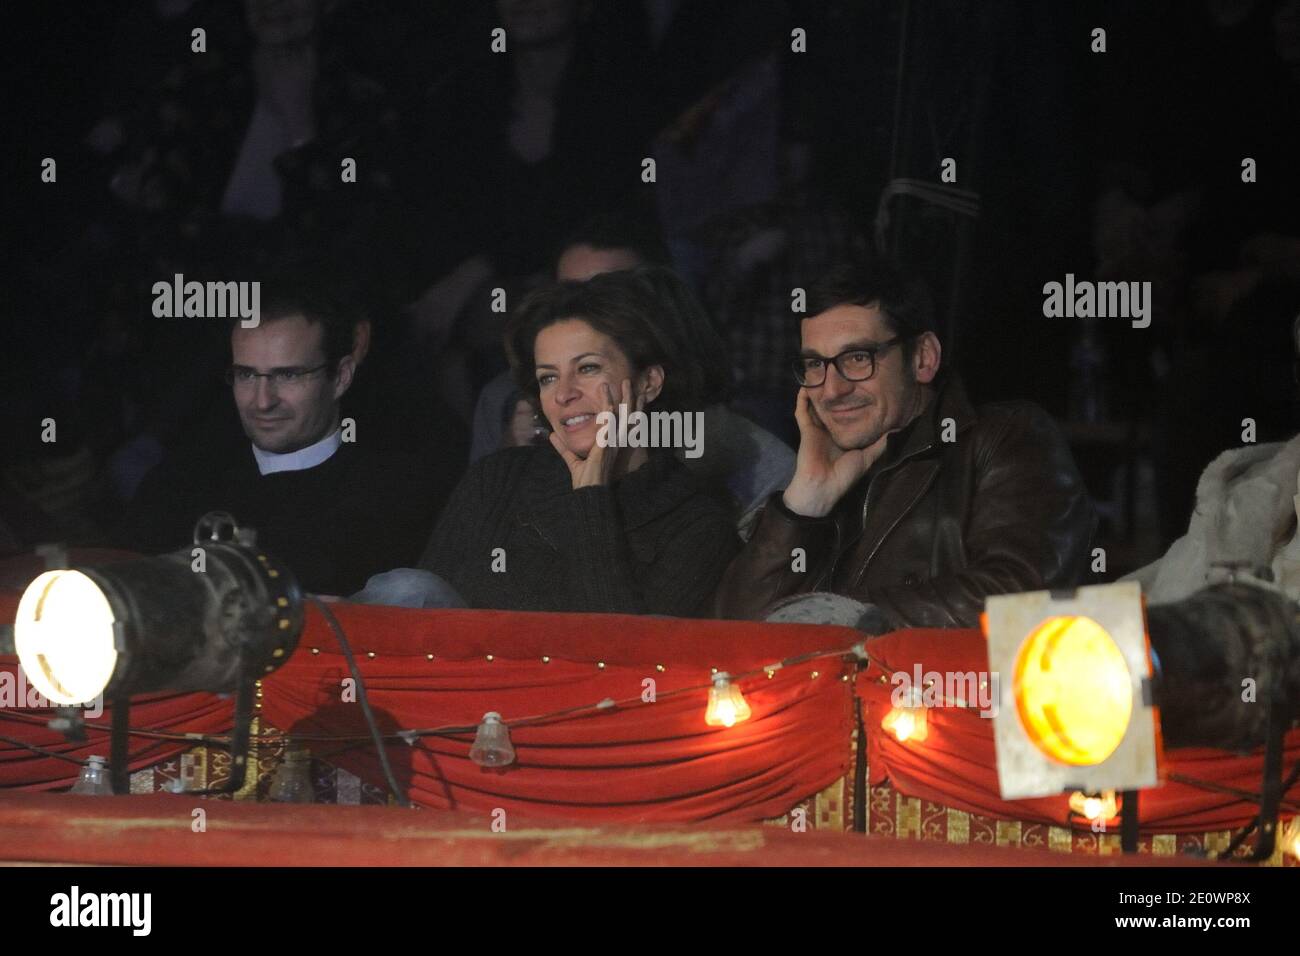 Corinne Touzet attending the Andre Joseph Bouglione circus show Premiere in Chatou near Paris, France on December 03, 2012. Photo by Marechal-Wyters/ABACAPRESS.COM Stock Photo